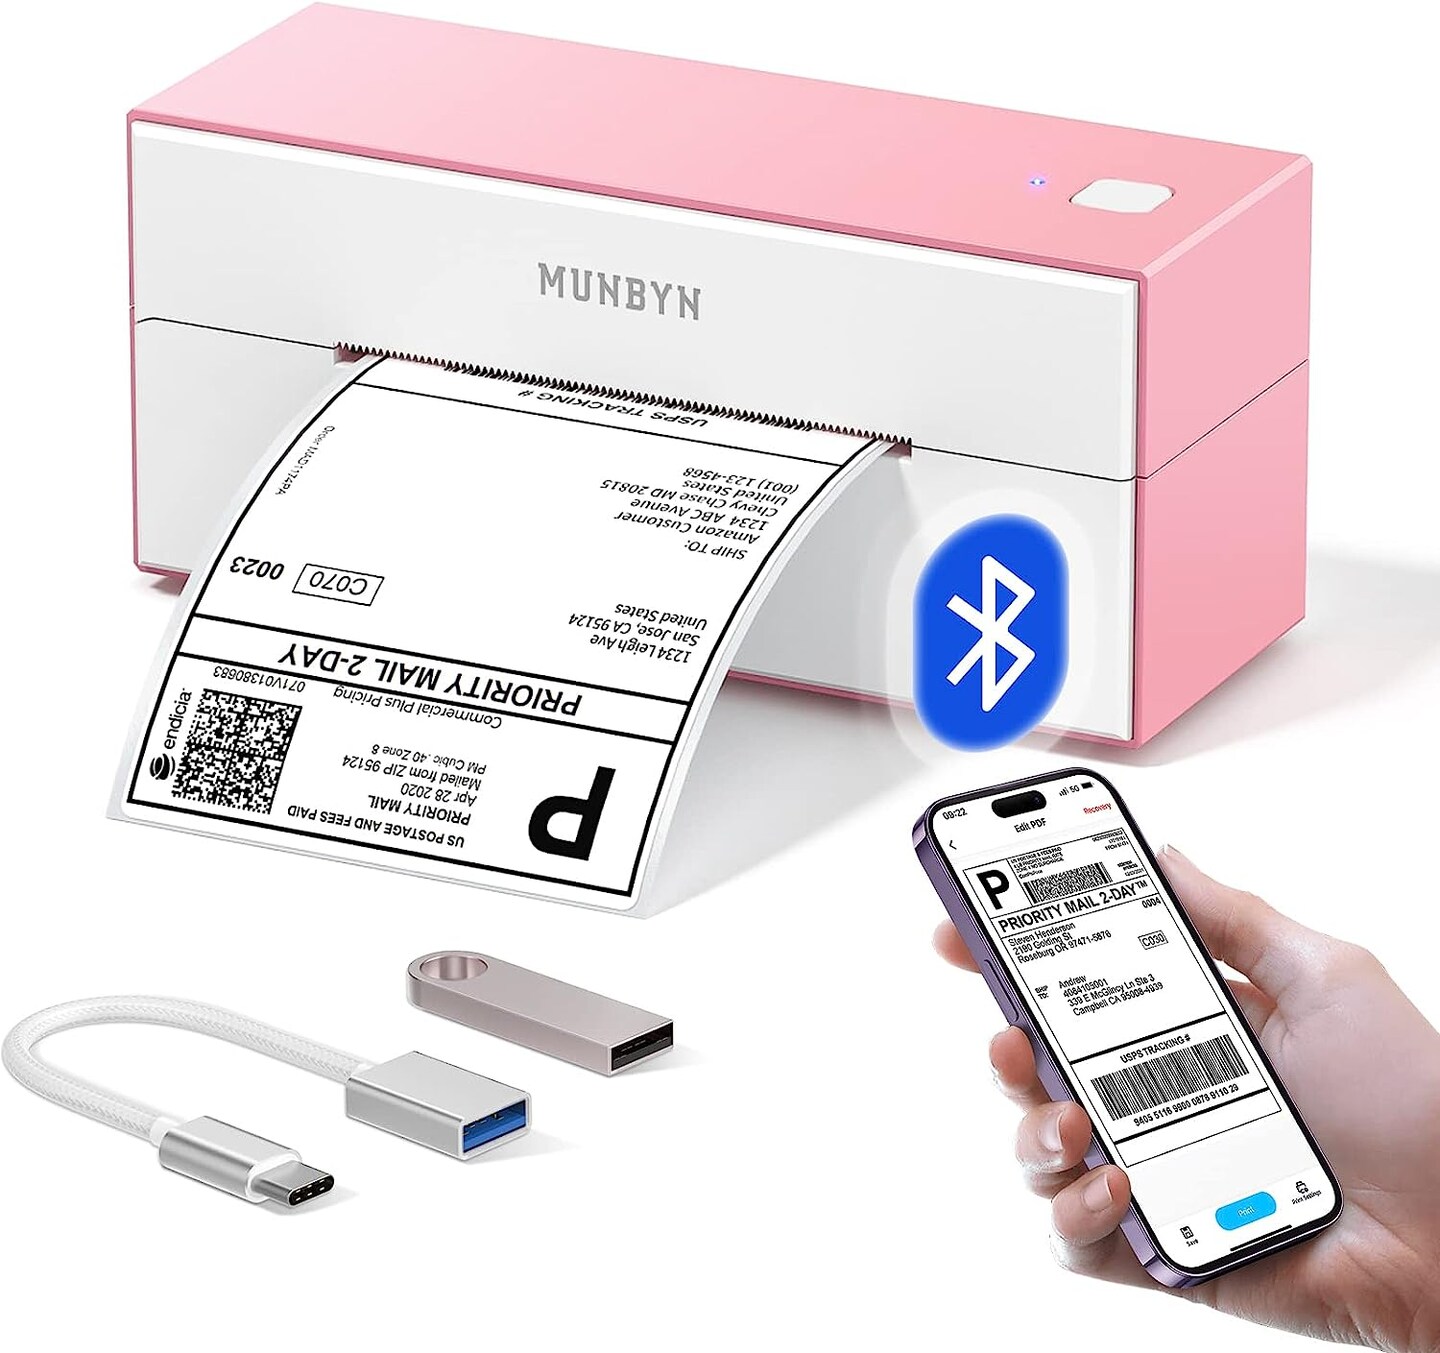 MUNBYN&#xAE; Bluetooth Thermal Label Printer | 4x6 Shipping Label Printer for Shipping Packages